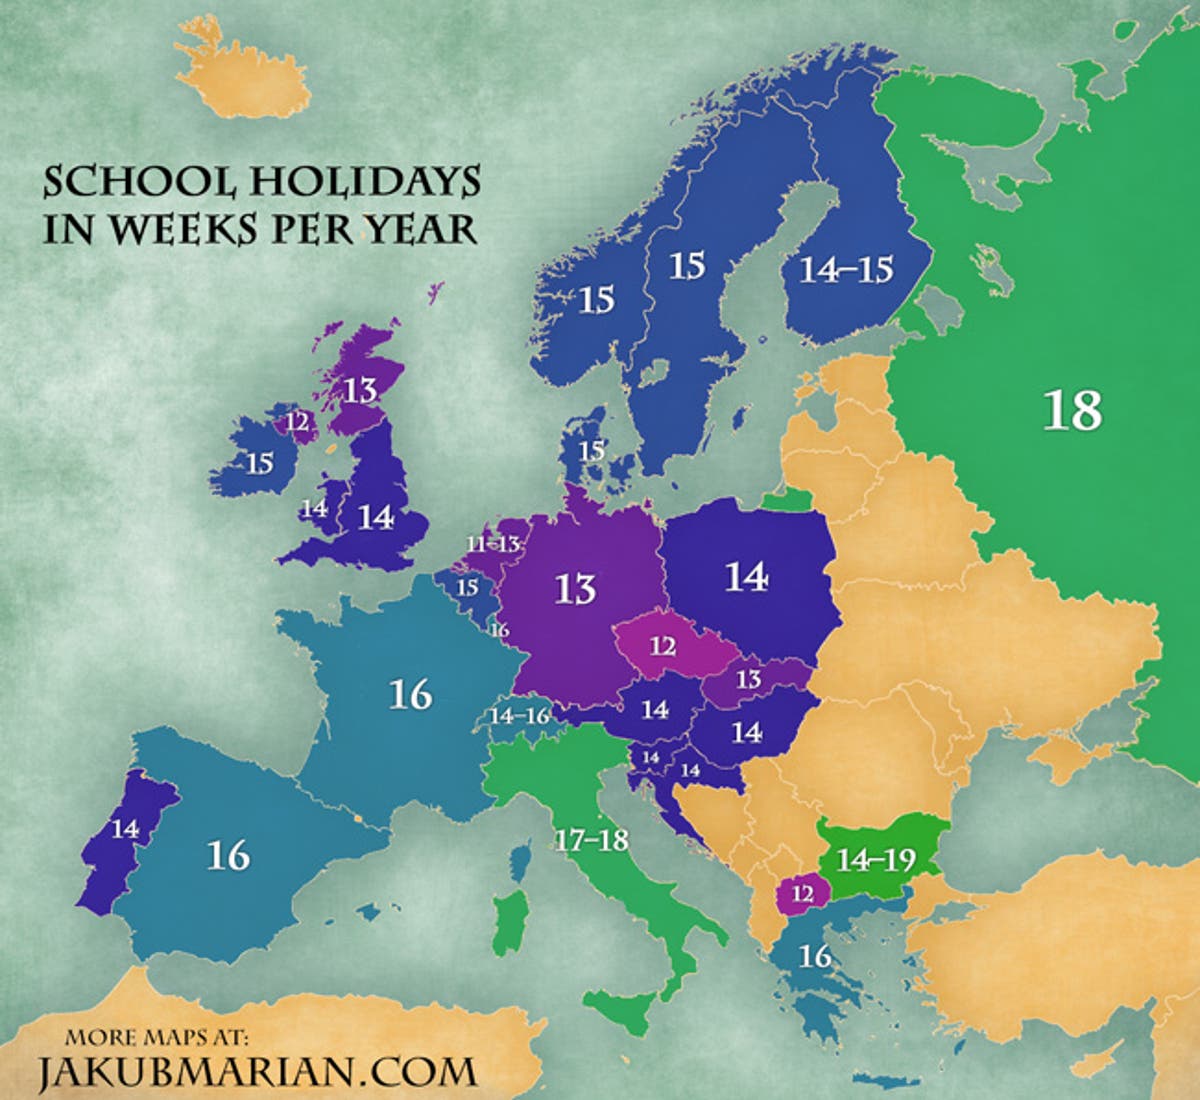 School holidays map shows difference in dates and duration around